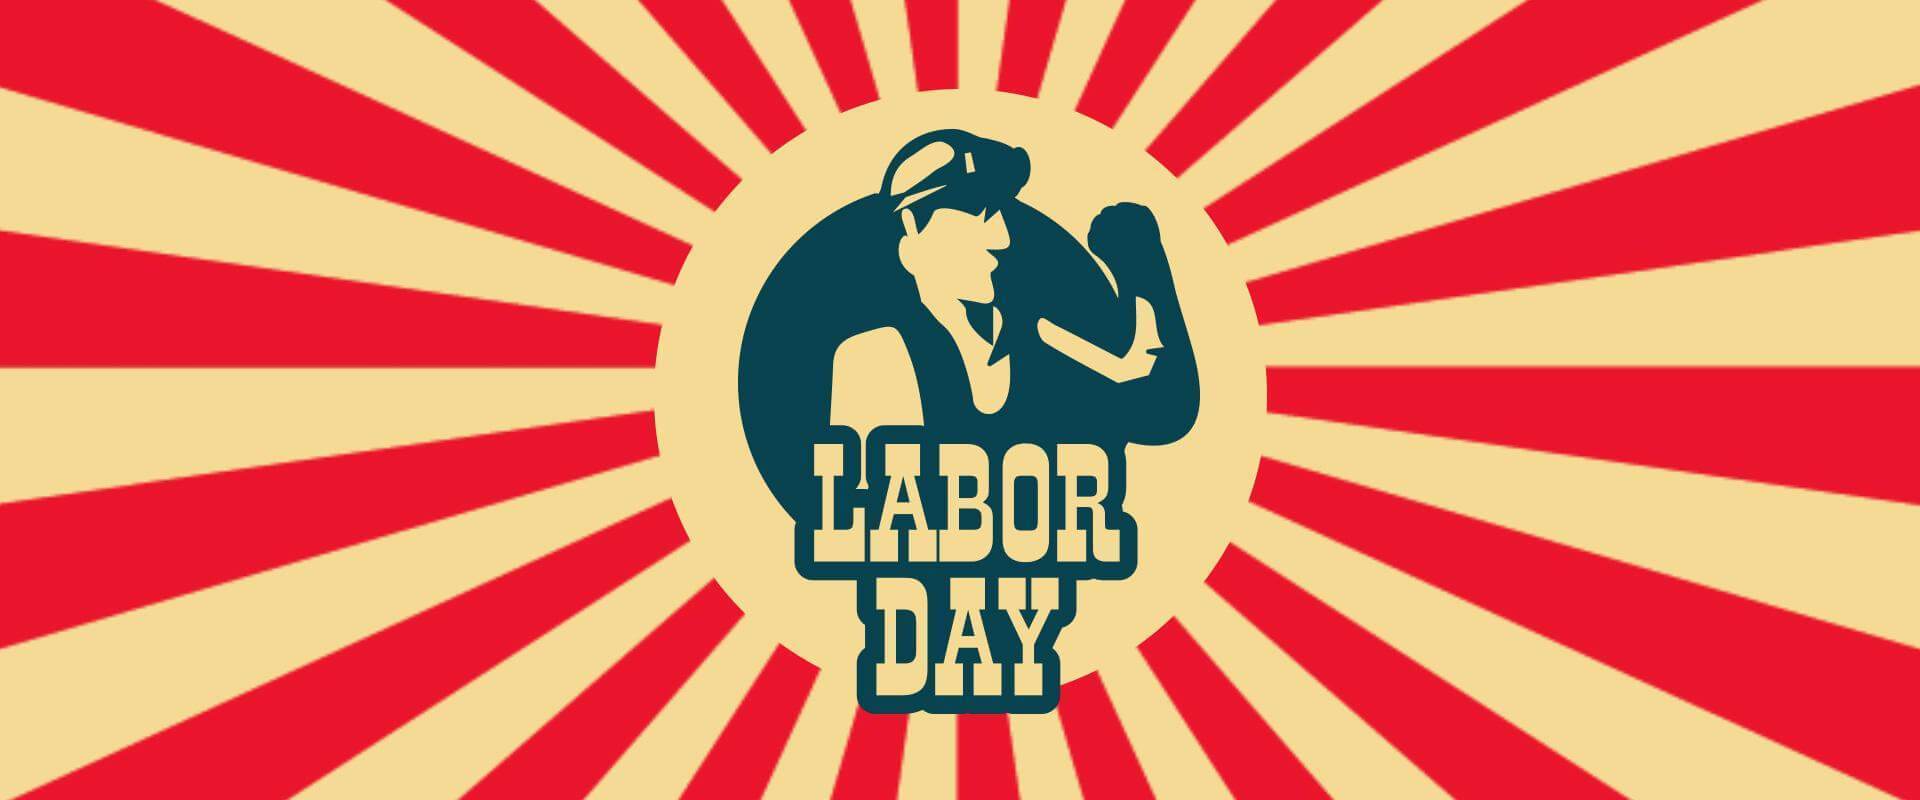 Labor Day Wallpapers Free Download - Guitars Kissing & The Contemporary , HD Wallpaper & Backgrounds